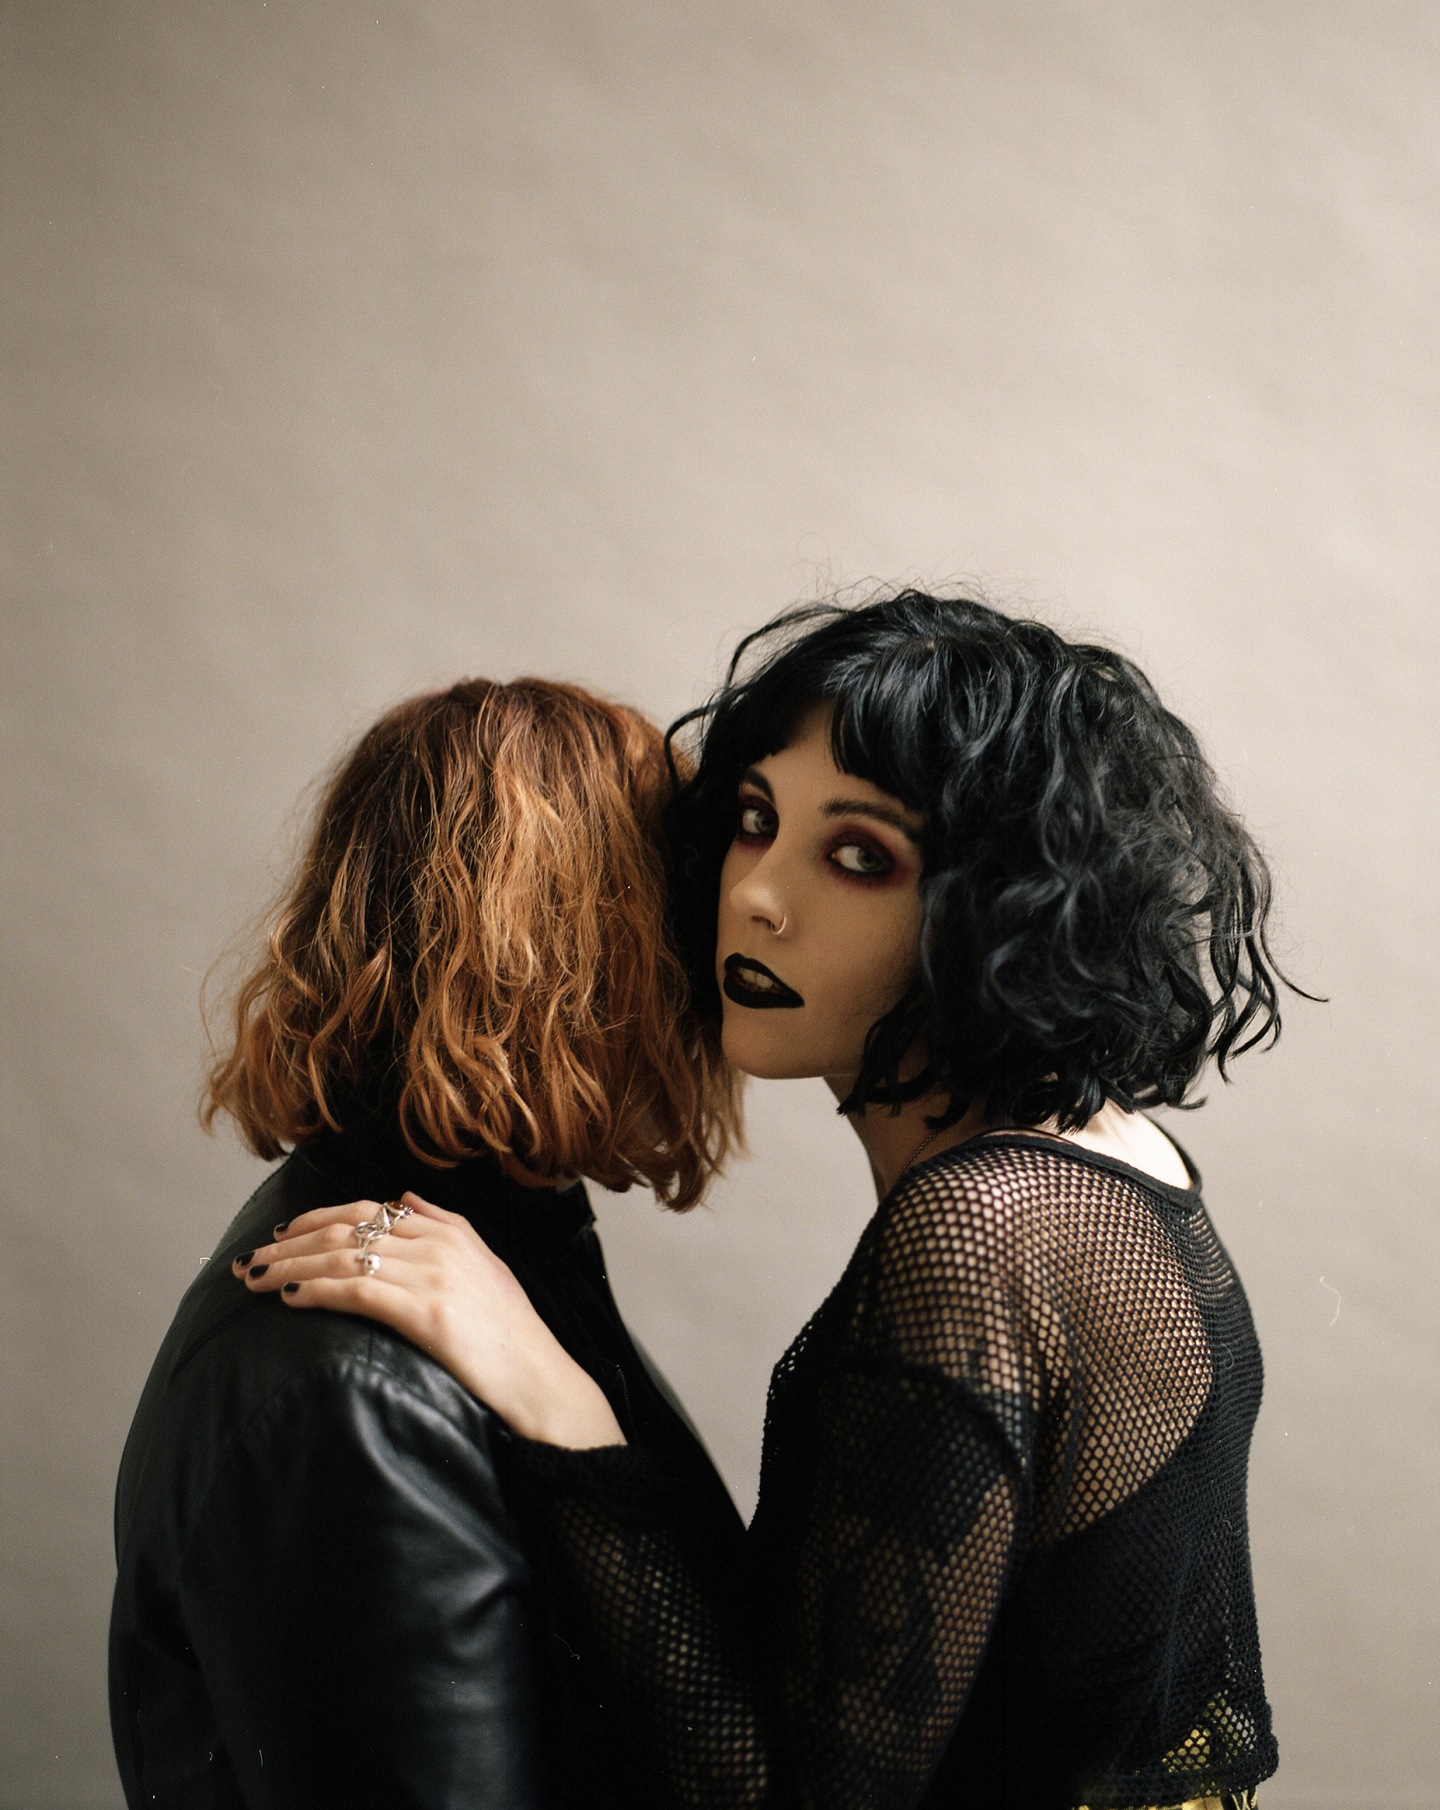 Pale Waves is the goth pop hybrid you didn’t know you needed